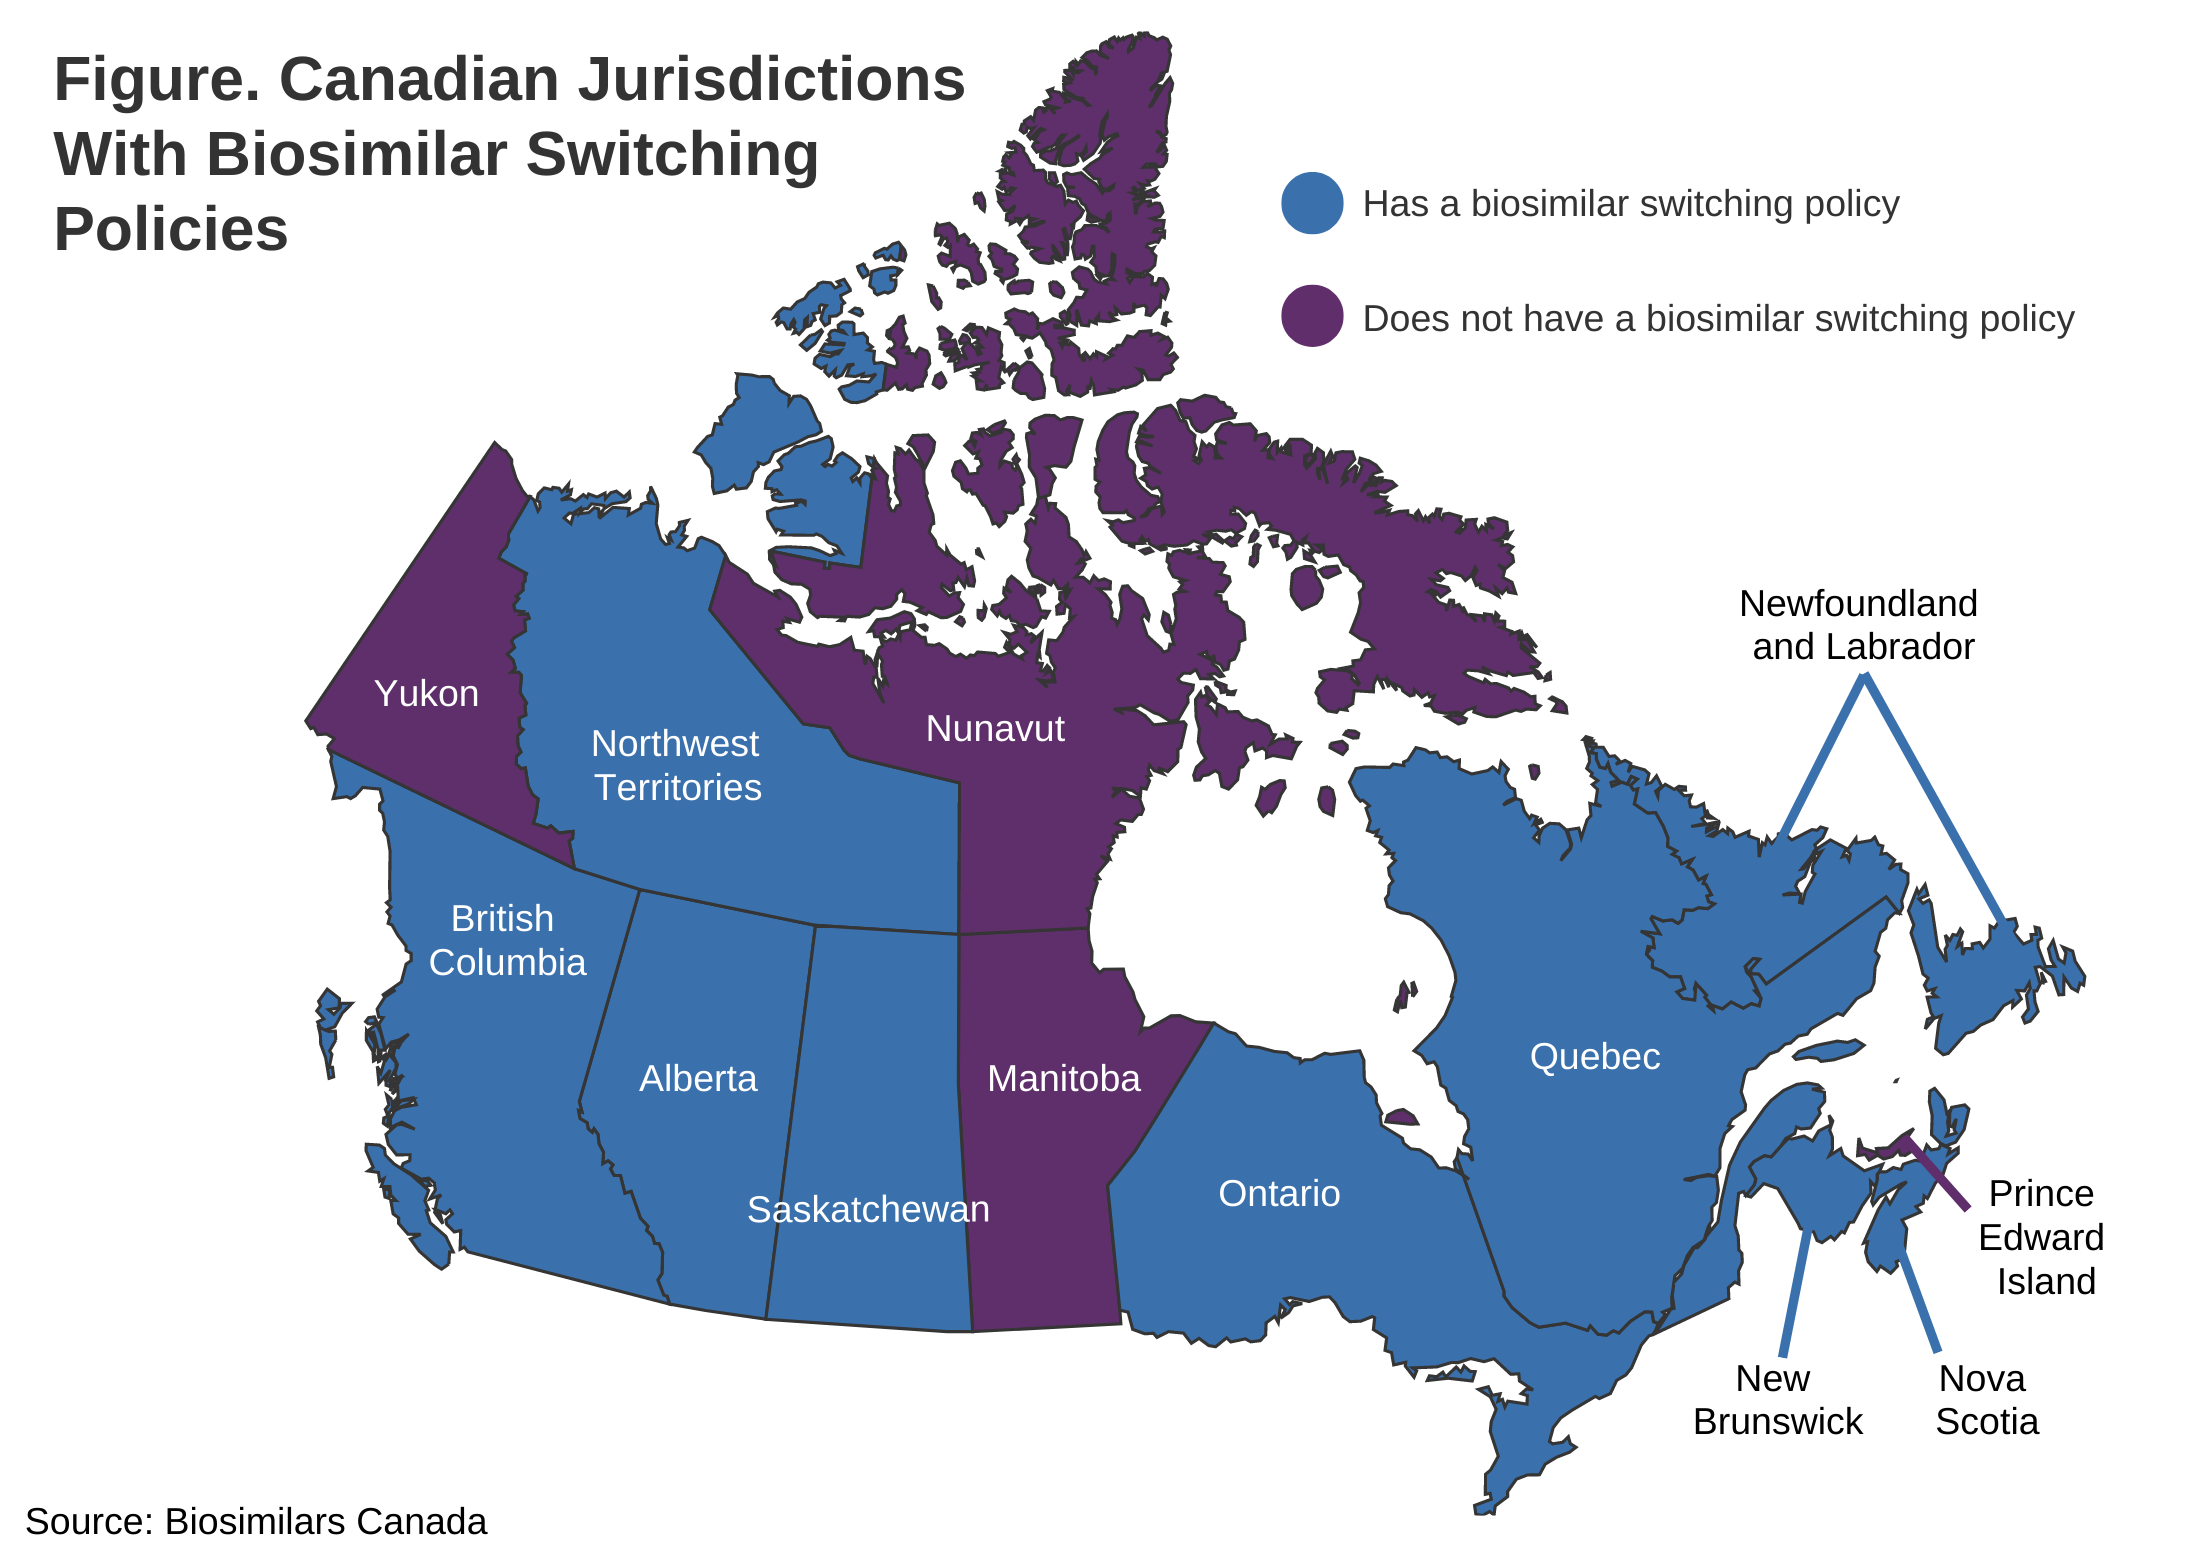 Figure. Canadian Jurisdictions With Biosimilar Switching Policies